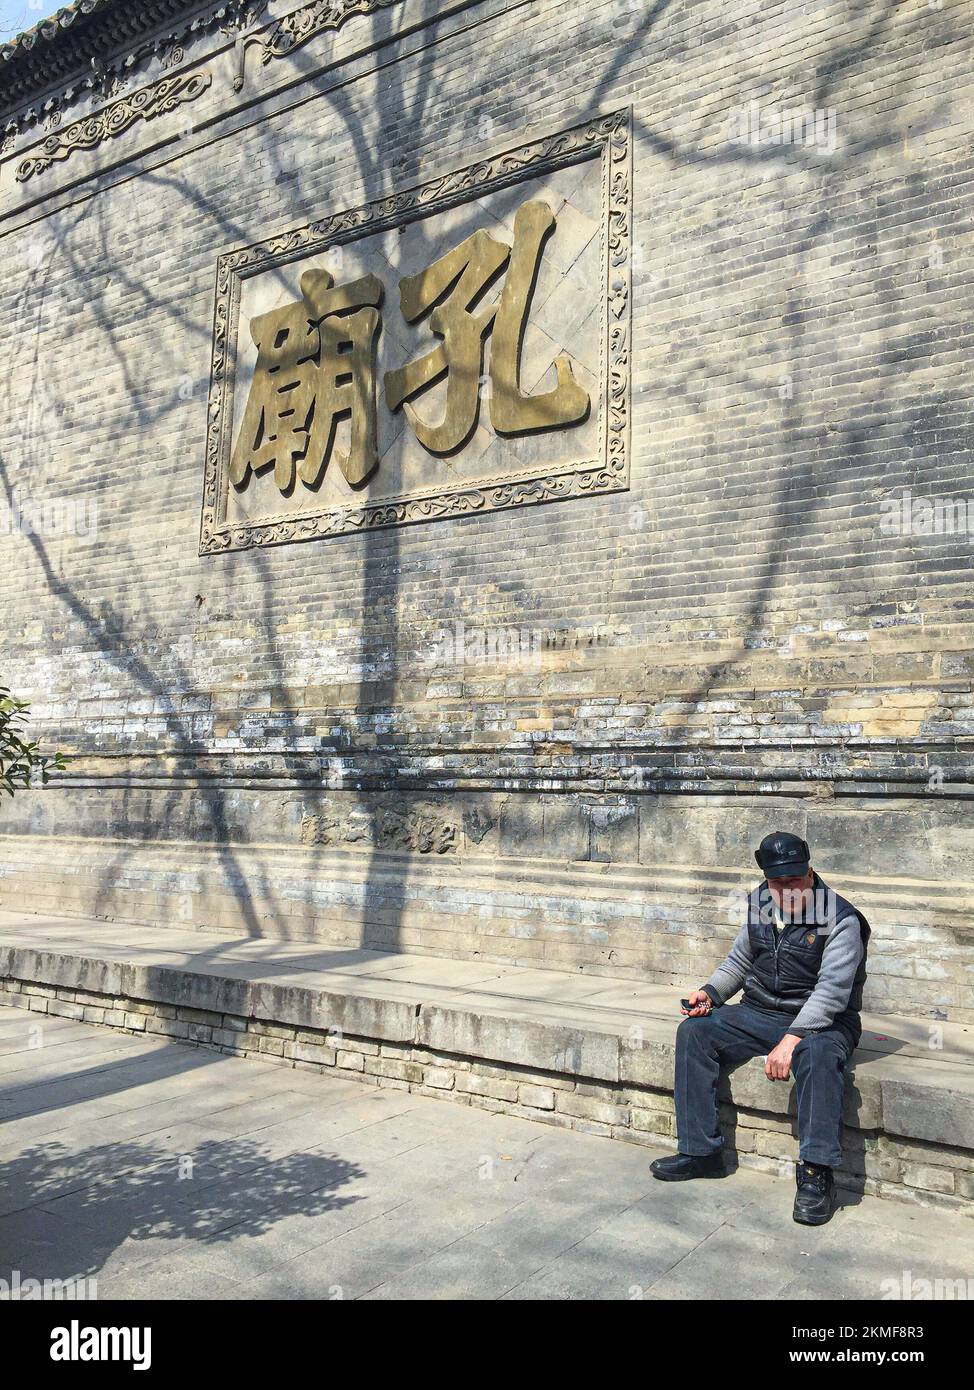 An old man sitting in front of the Confucian Temple 'Kong Miao' in Xi'an City, China Stock Photo